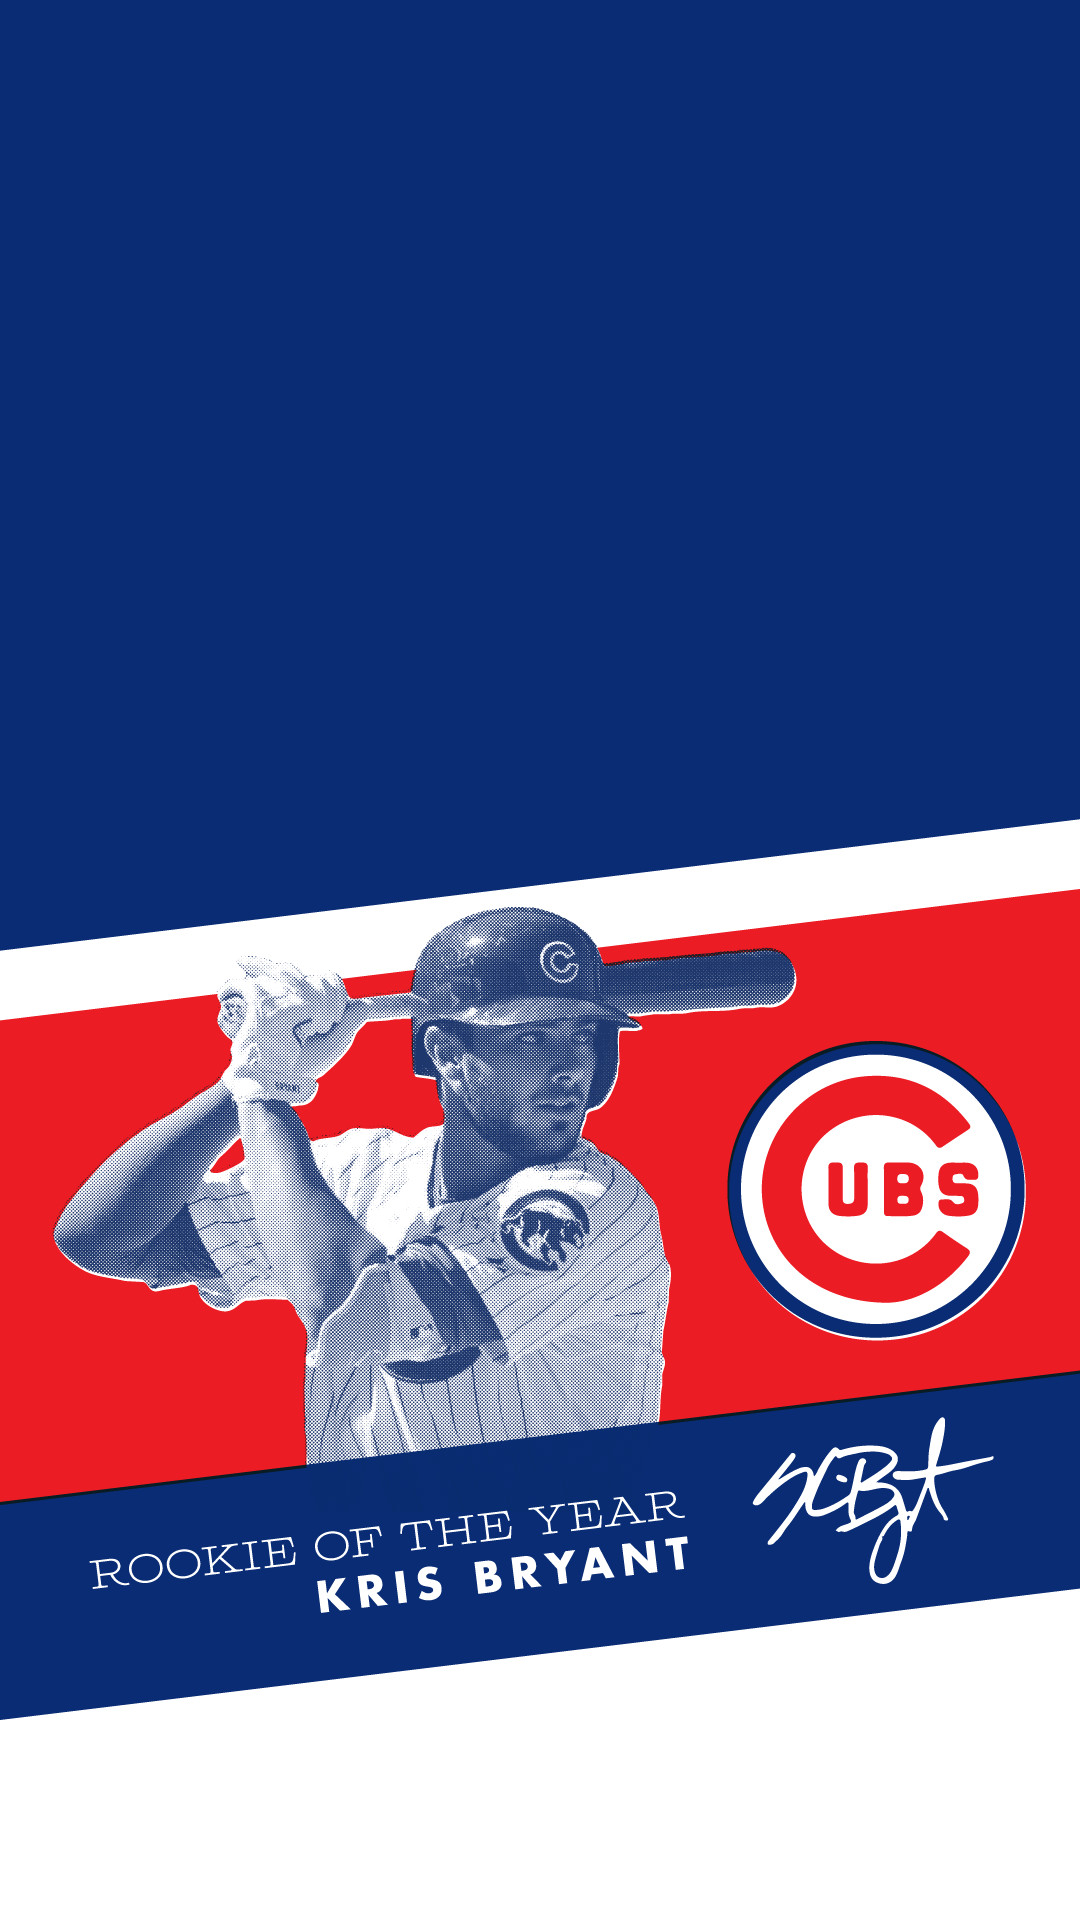 Kris Bryant Rookie of the Year, …